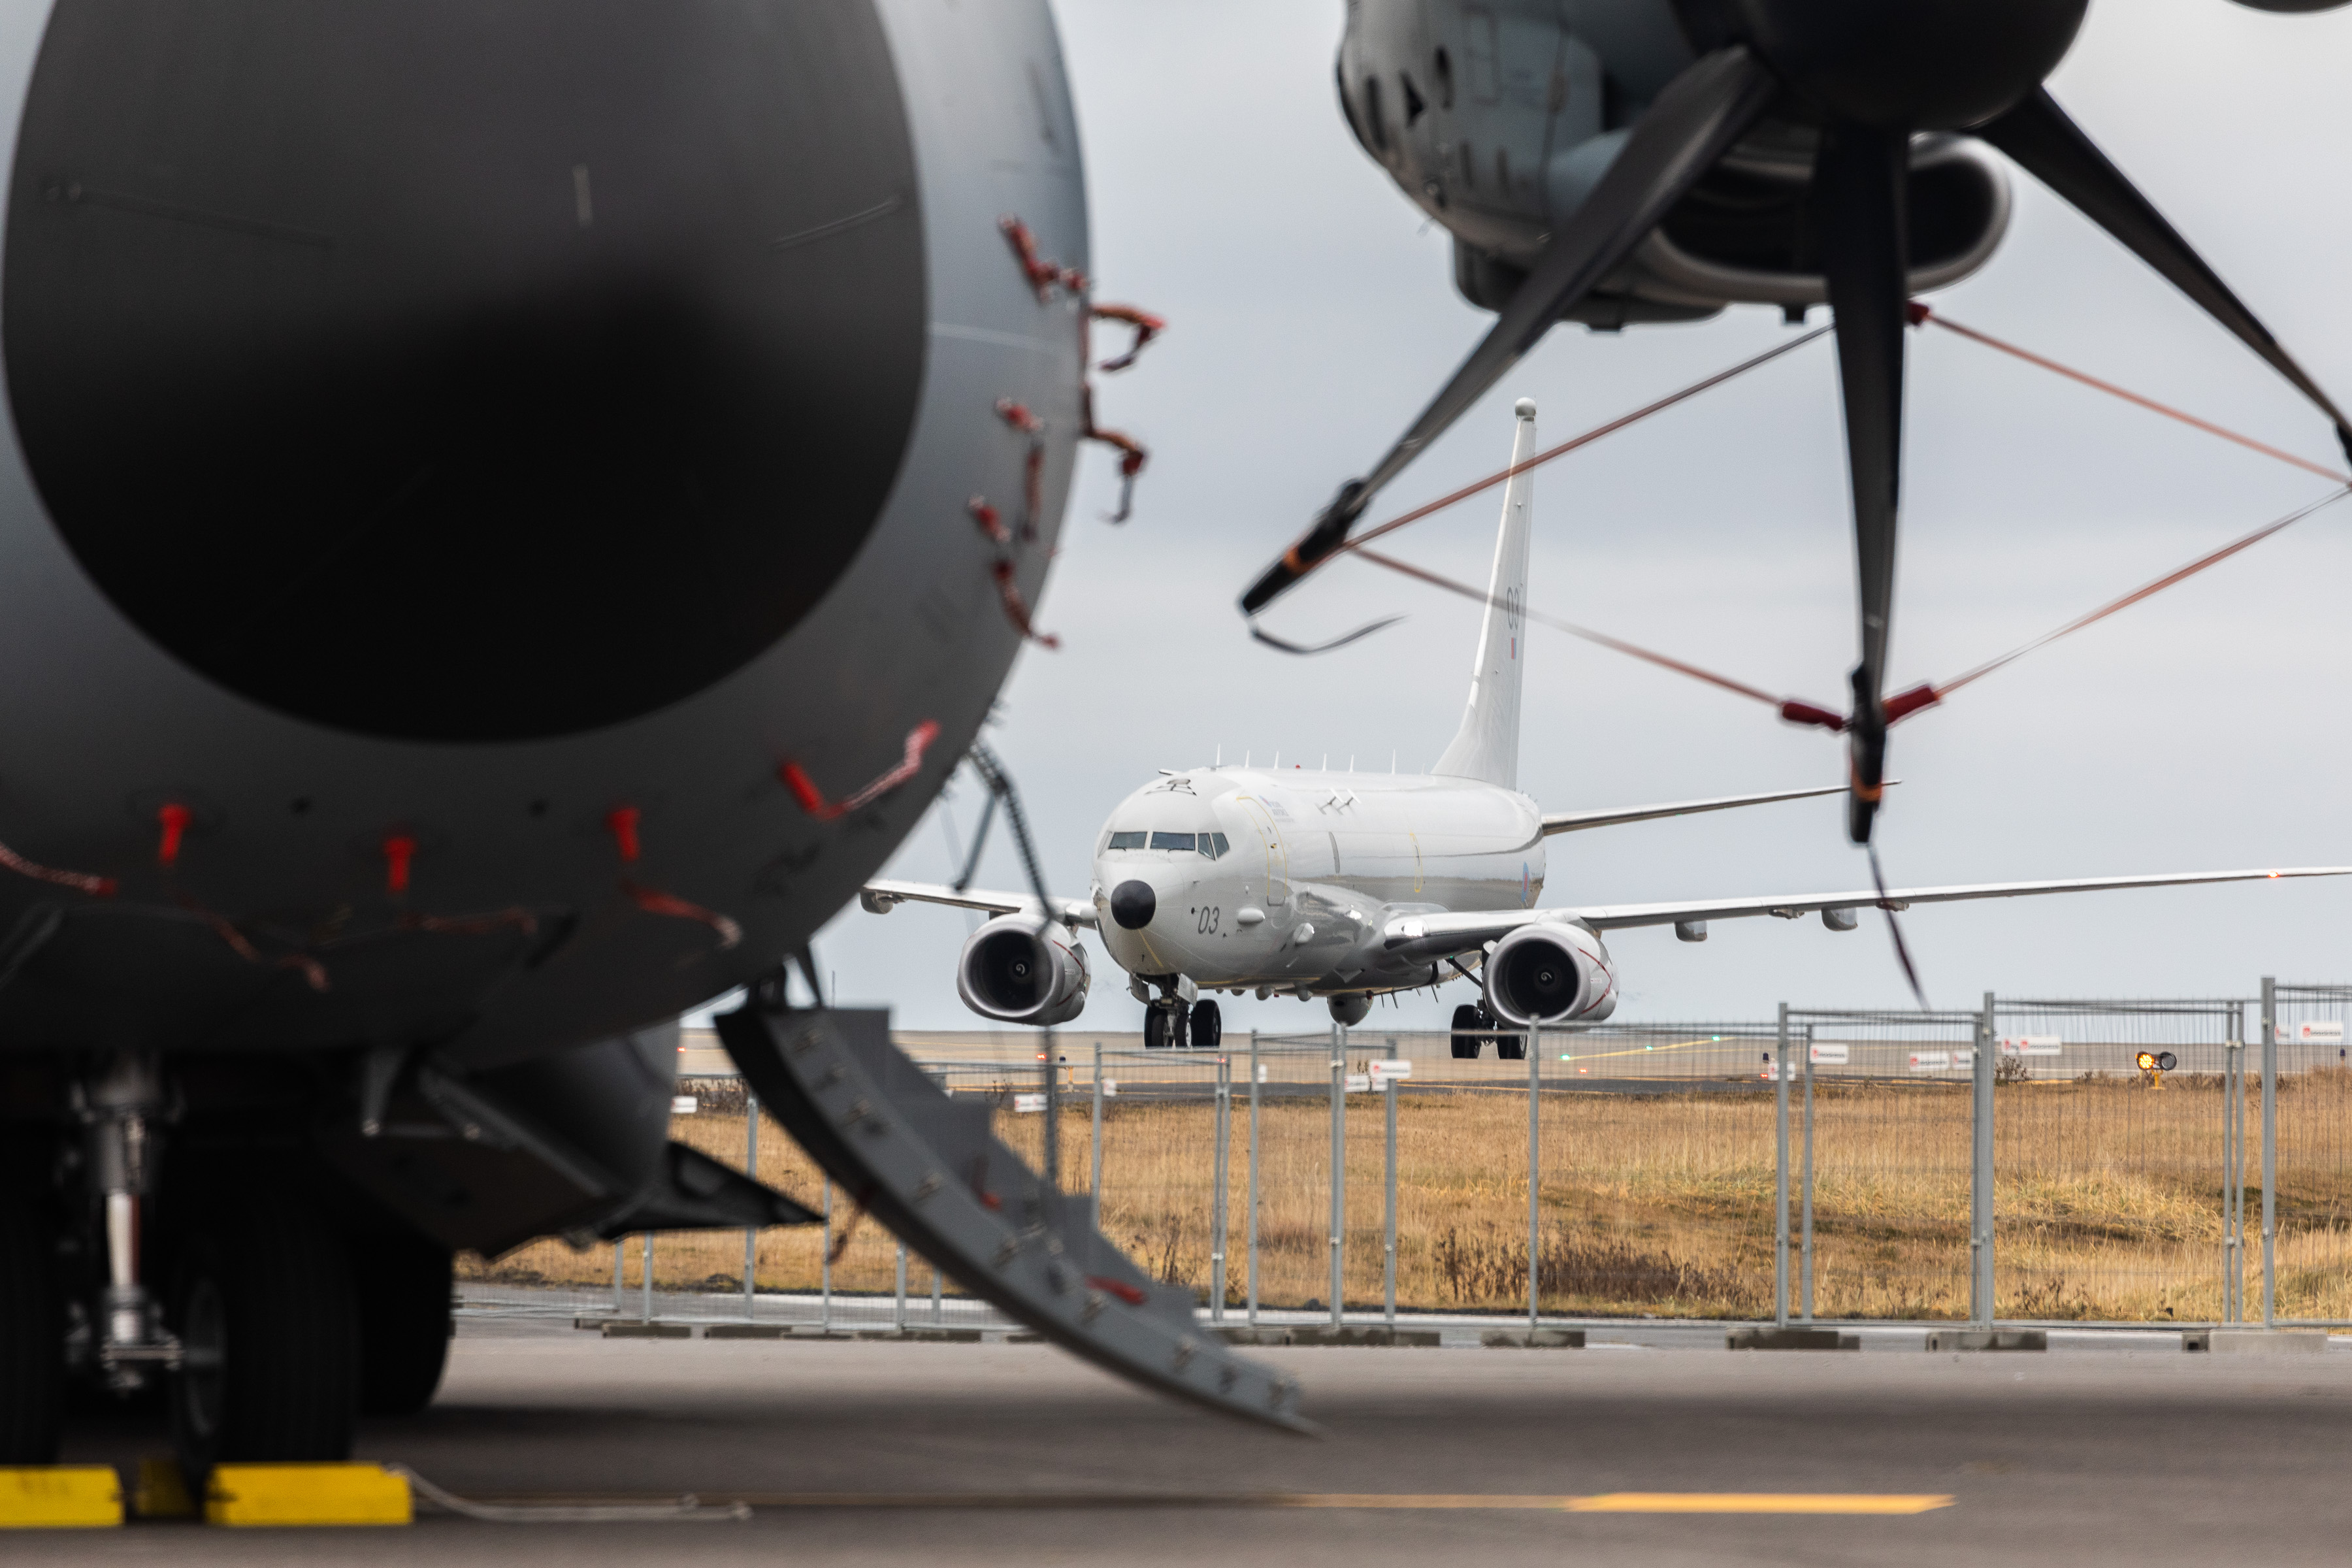 Atlas A400M and a Poseidon MRA1 on the runway.